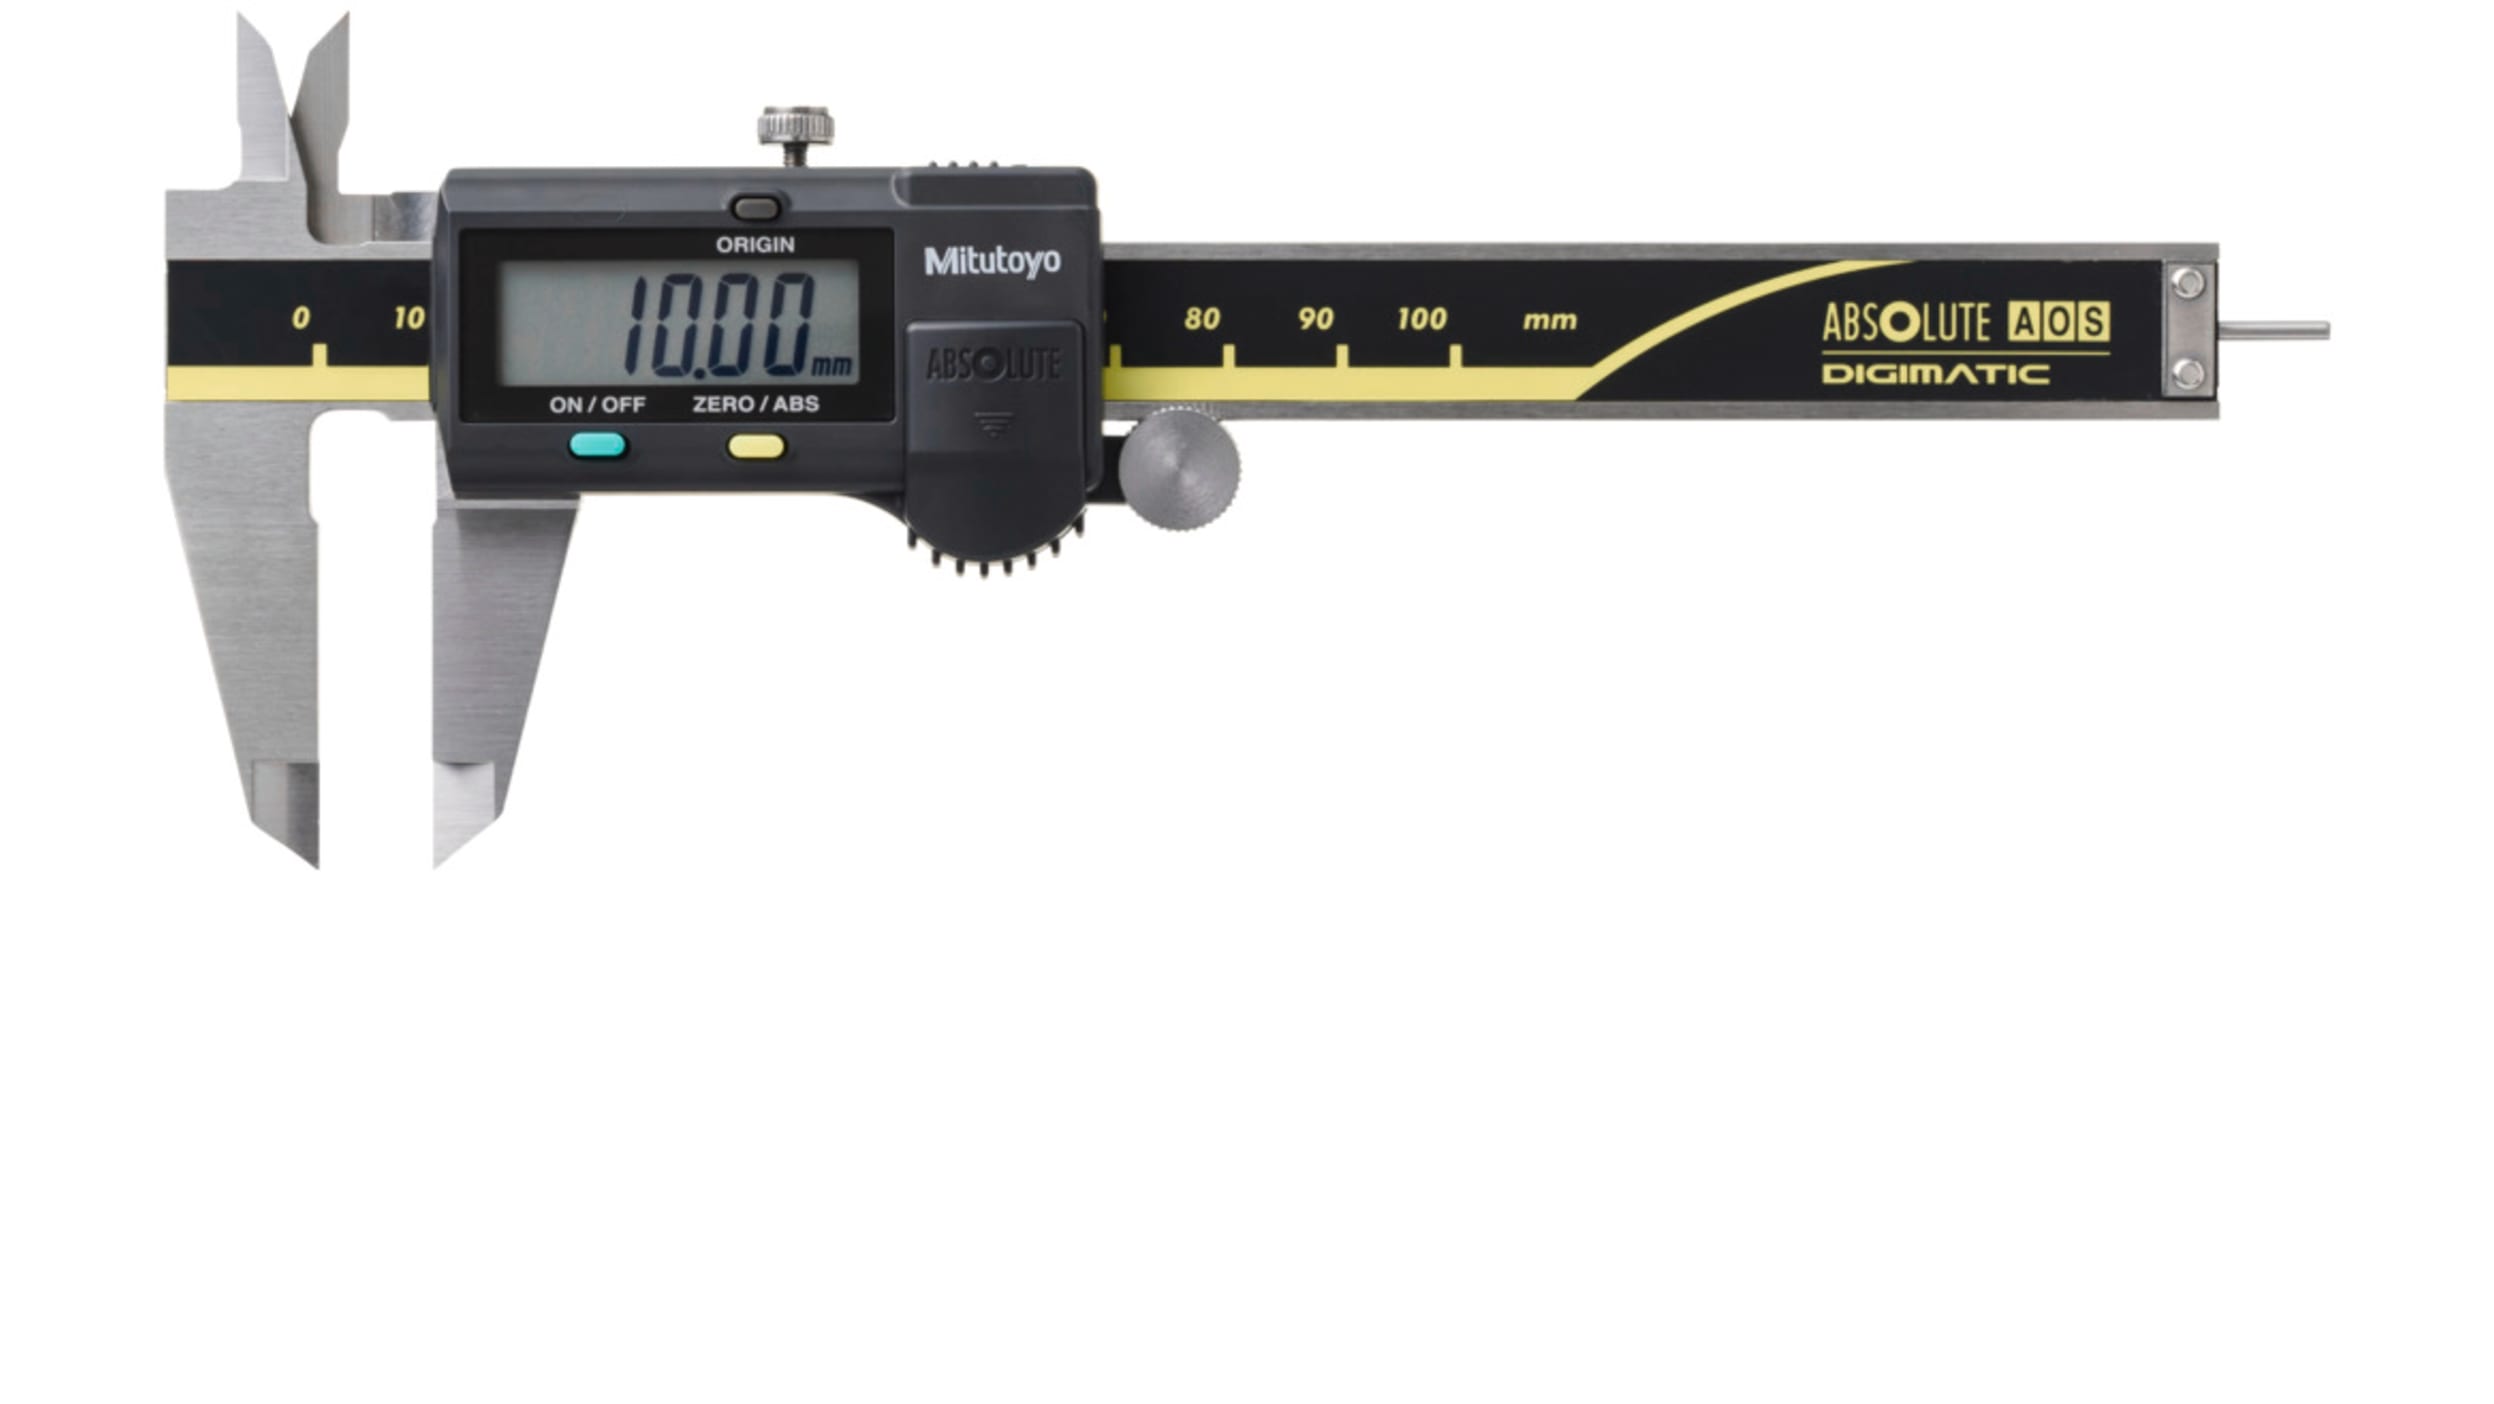 CD-10APX | ABS digimatic caliper | RS